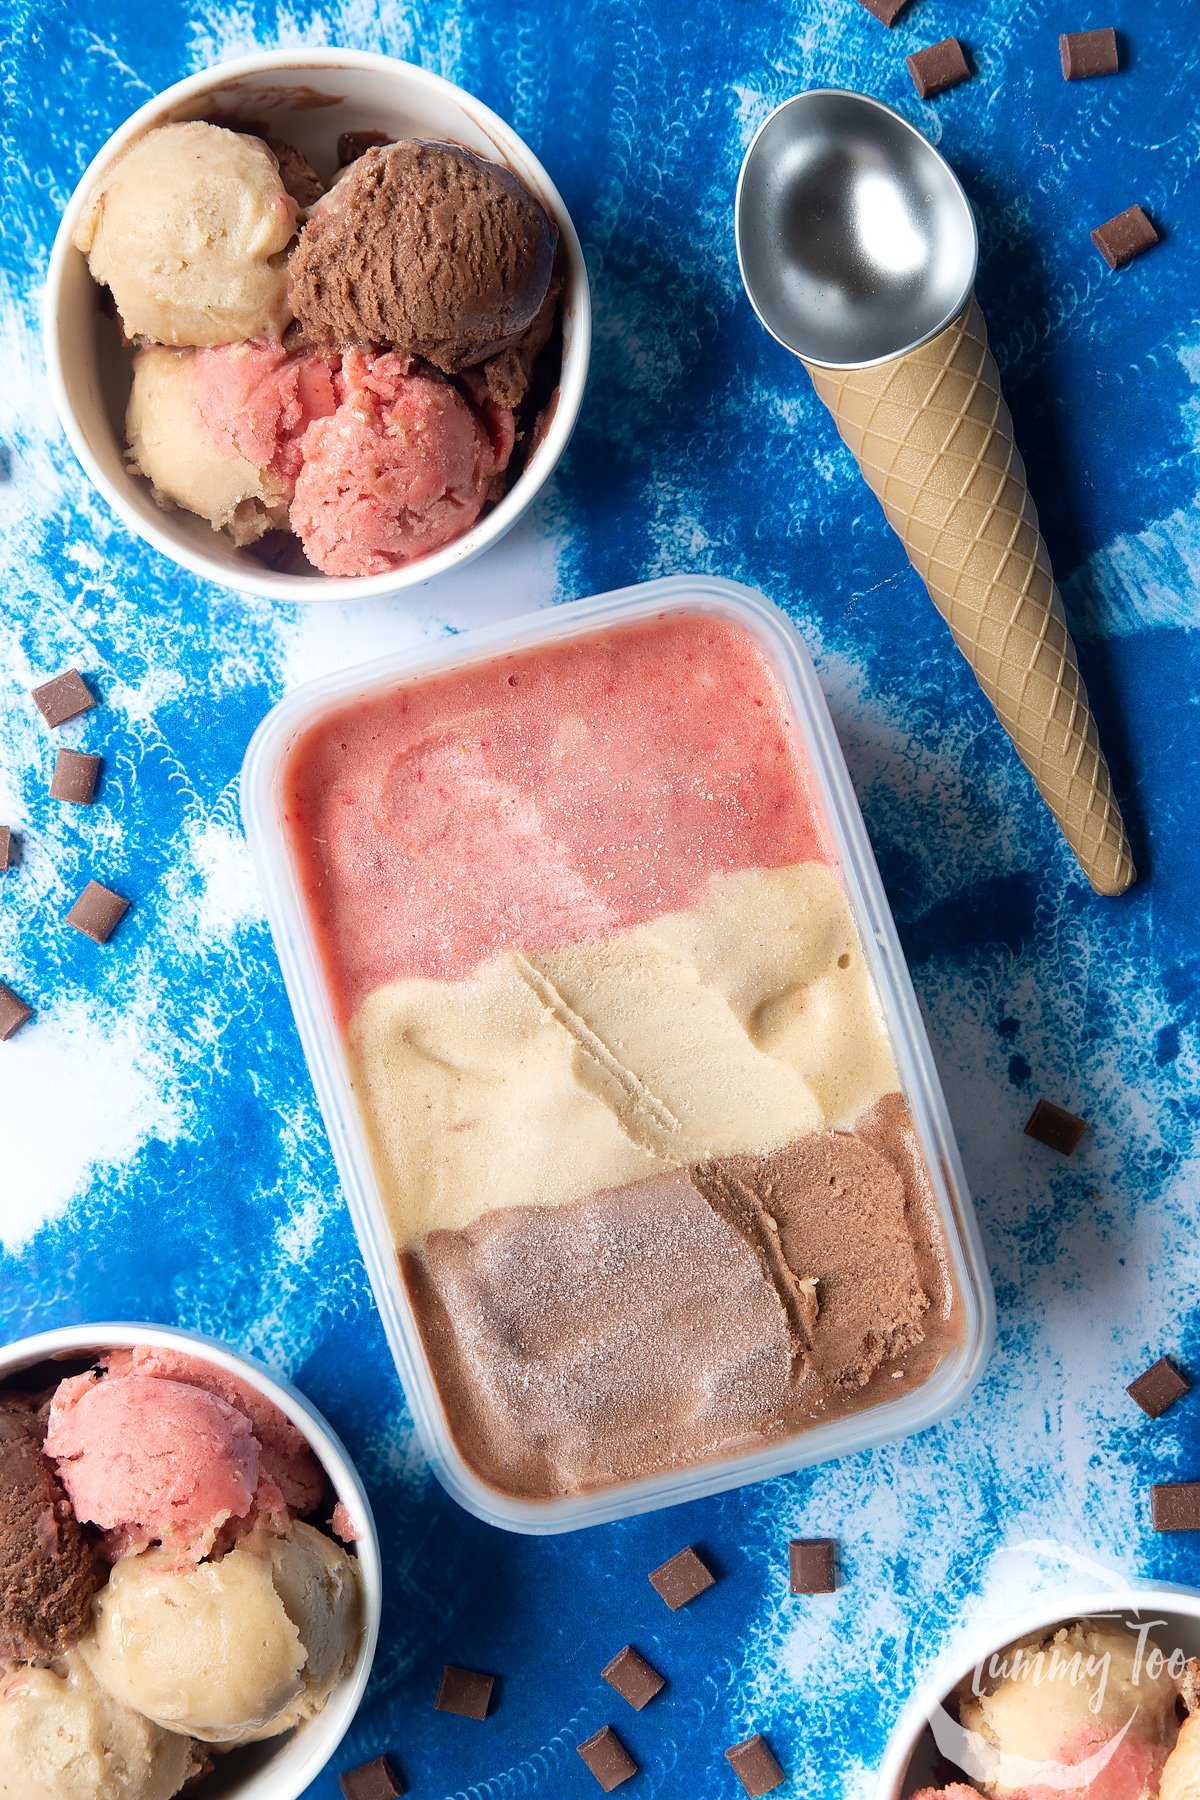 Dairy-free Neapolitan ice cream in a tub. More is served in small white bowls. An ice cream scoop and scattered chocolate chips are also shown.